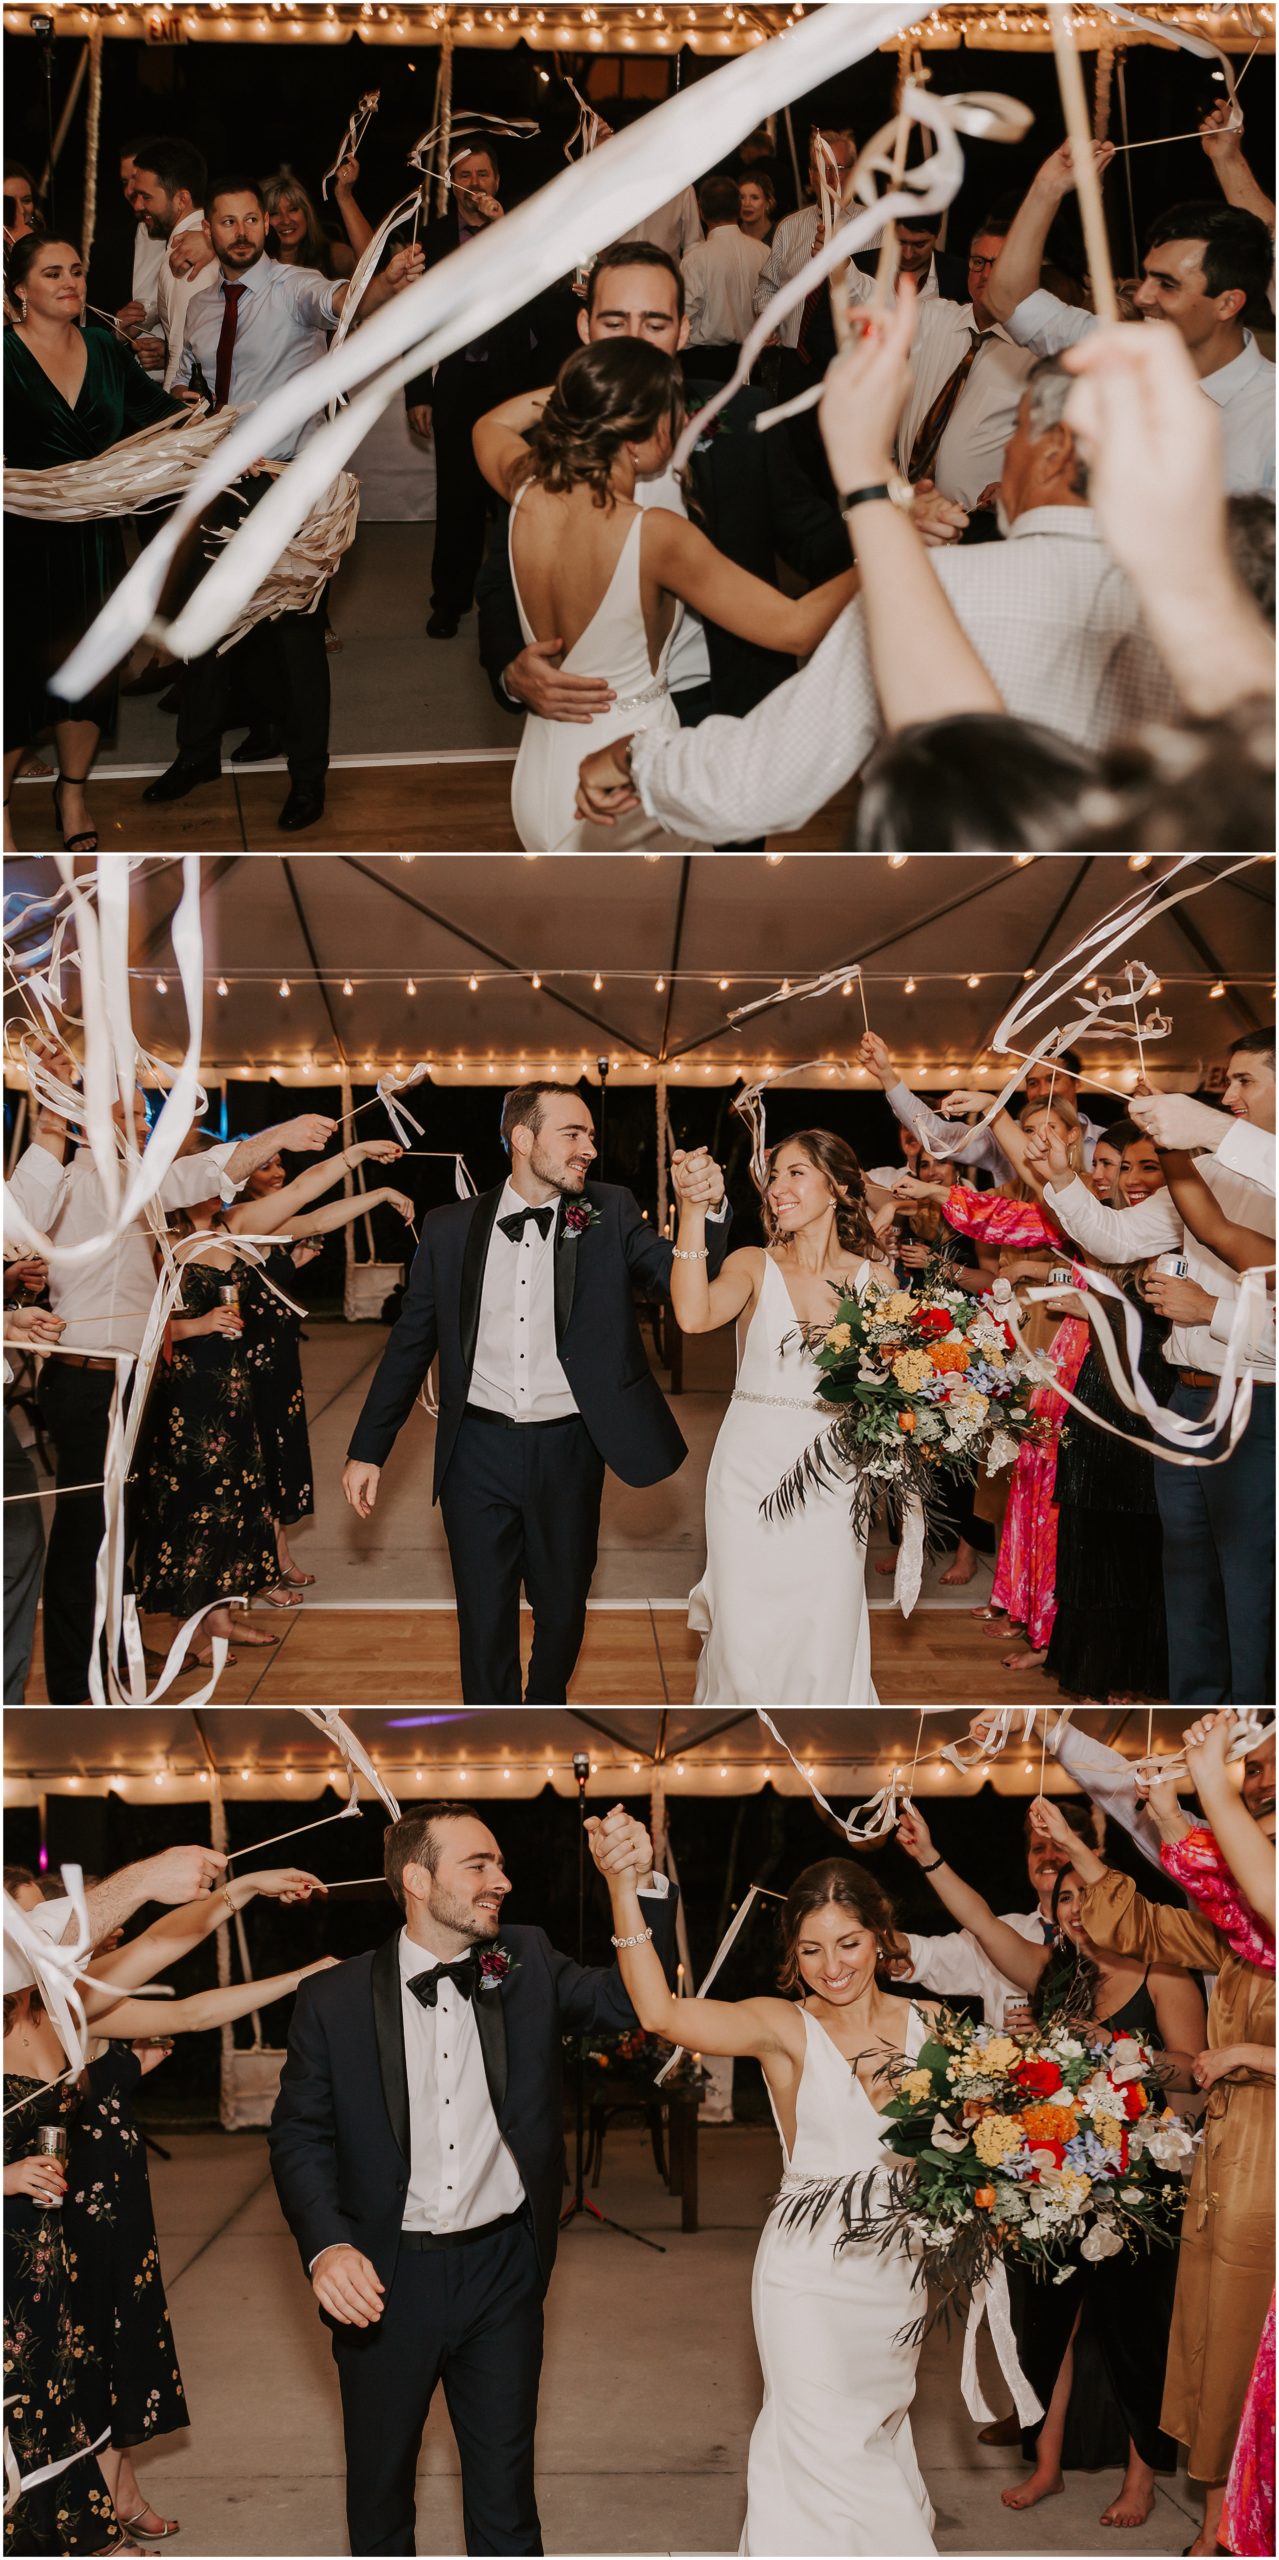 For the exit from their stylish wedding they chose  wands with fabric and bells for everyone to use in lieu of sparklers